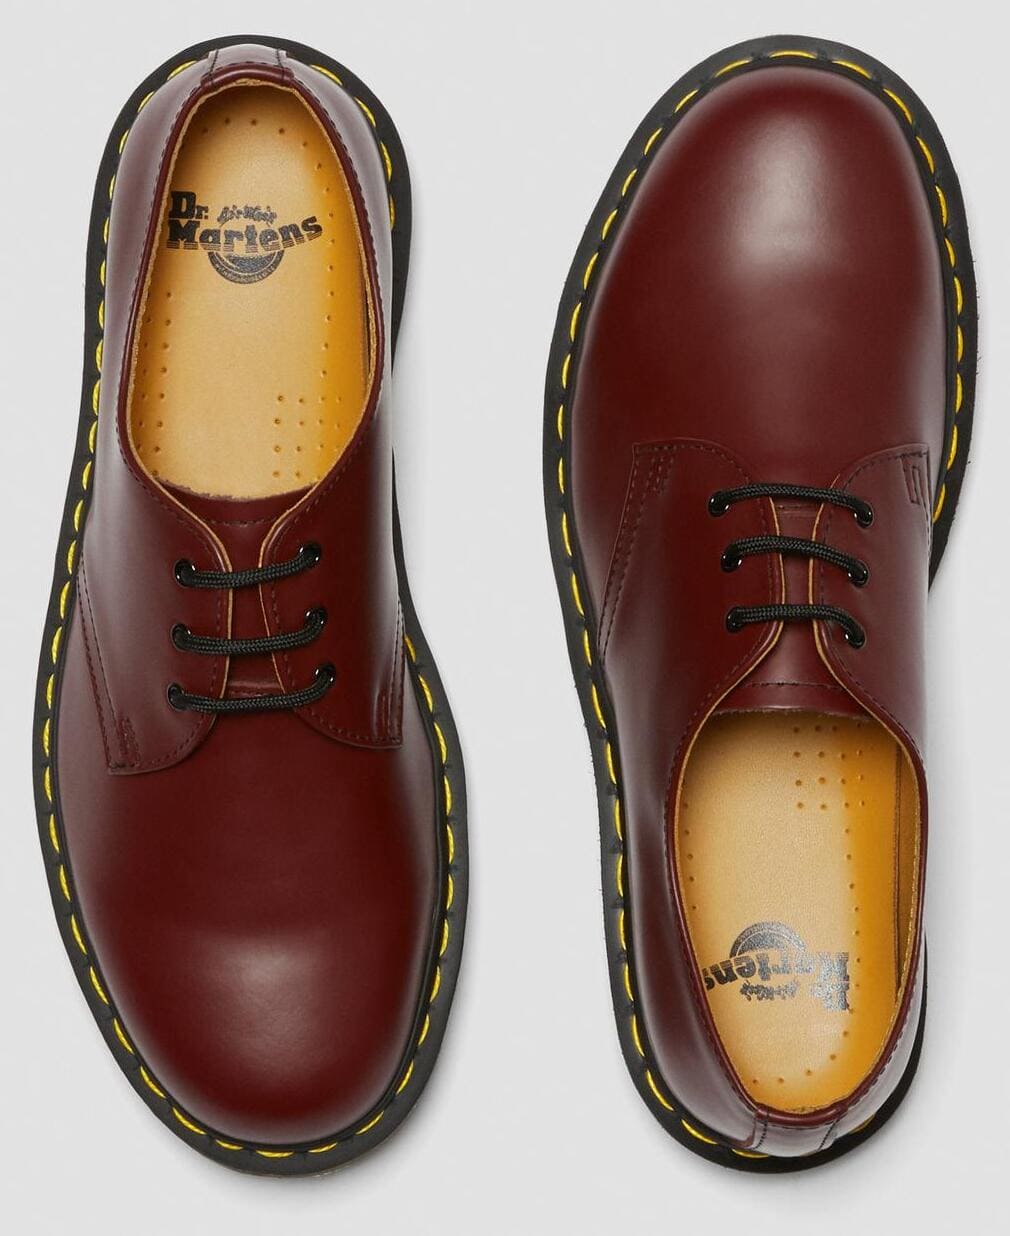 Dr. Martens 1461 Smooth Leather Oxford Shoes Cherry Red